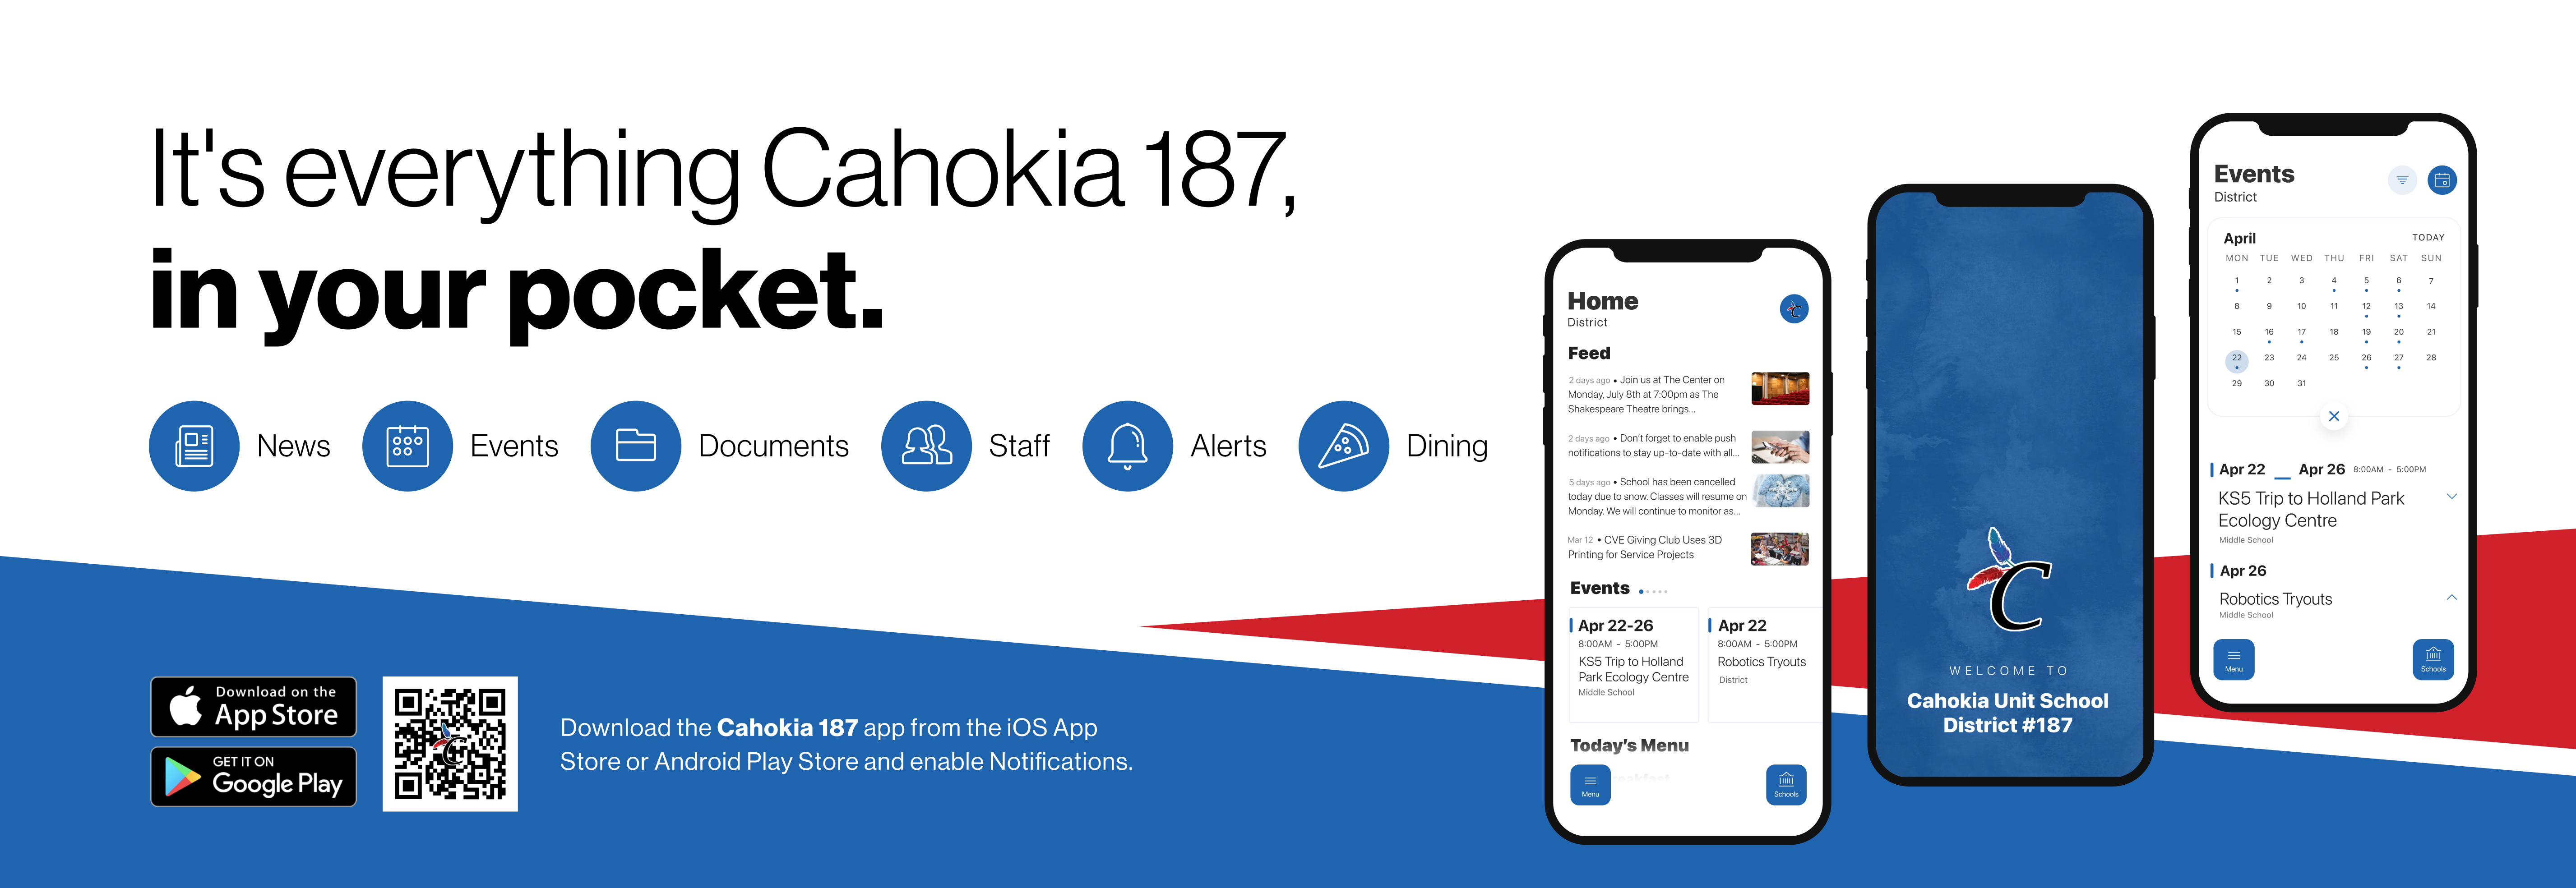 a flyer for the new district app, with a QR code for download in the lower left, "It's everything Cahokia 187, in your pocket"